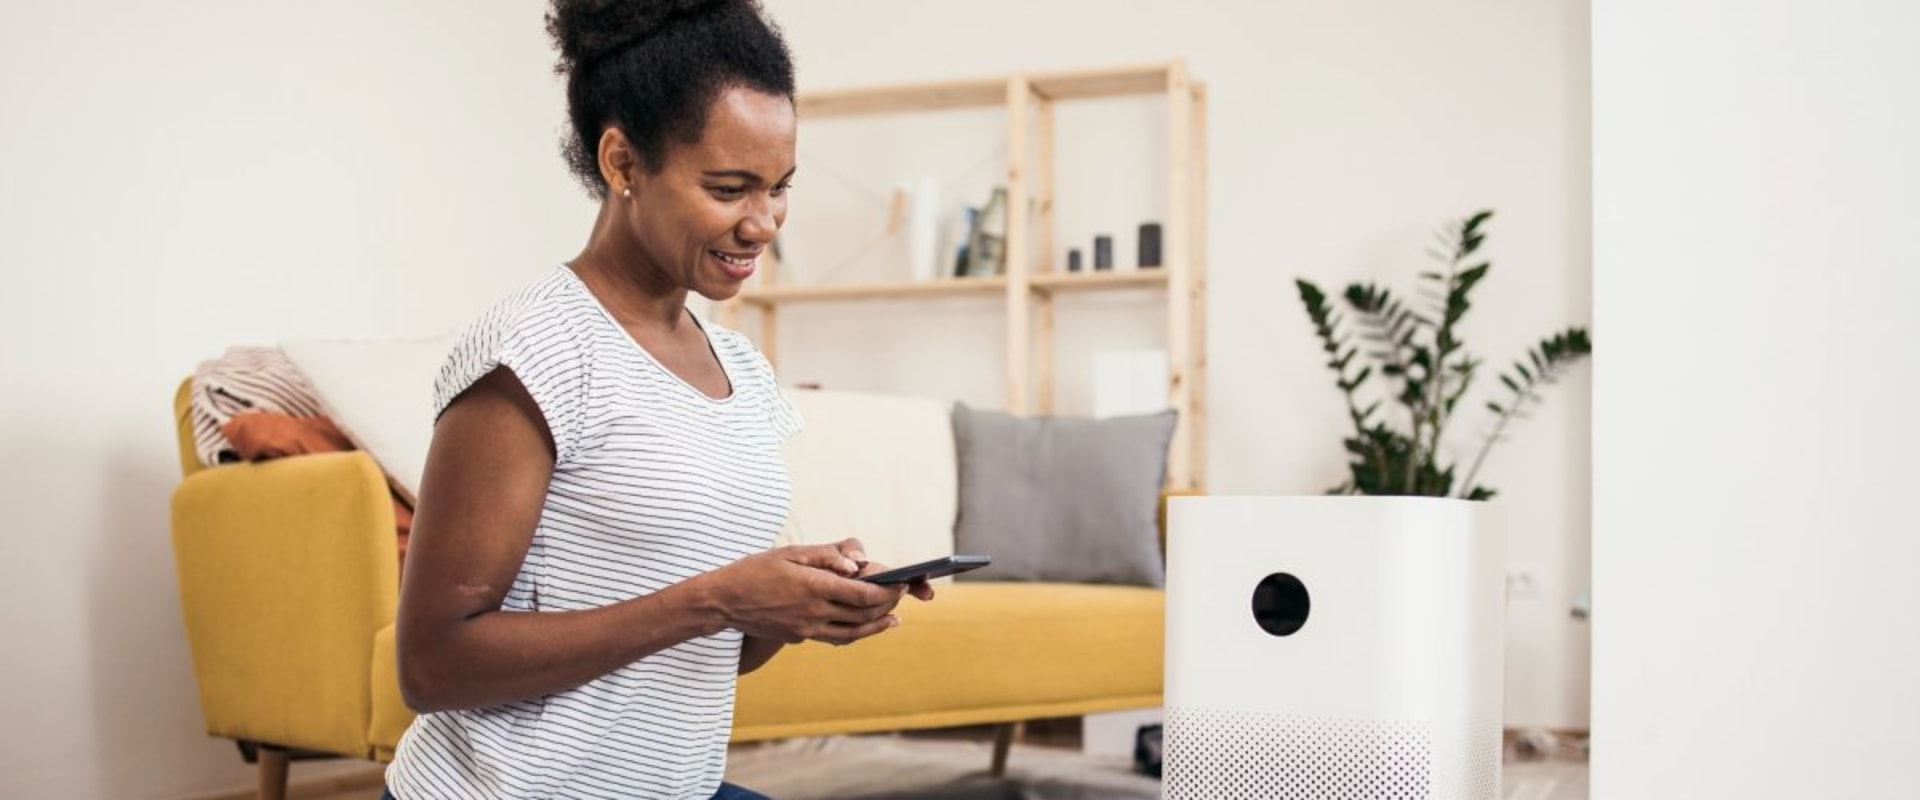 The Benefits of Air Purifiers: Why You Should Invest in Clean Air